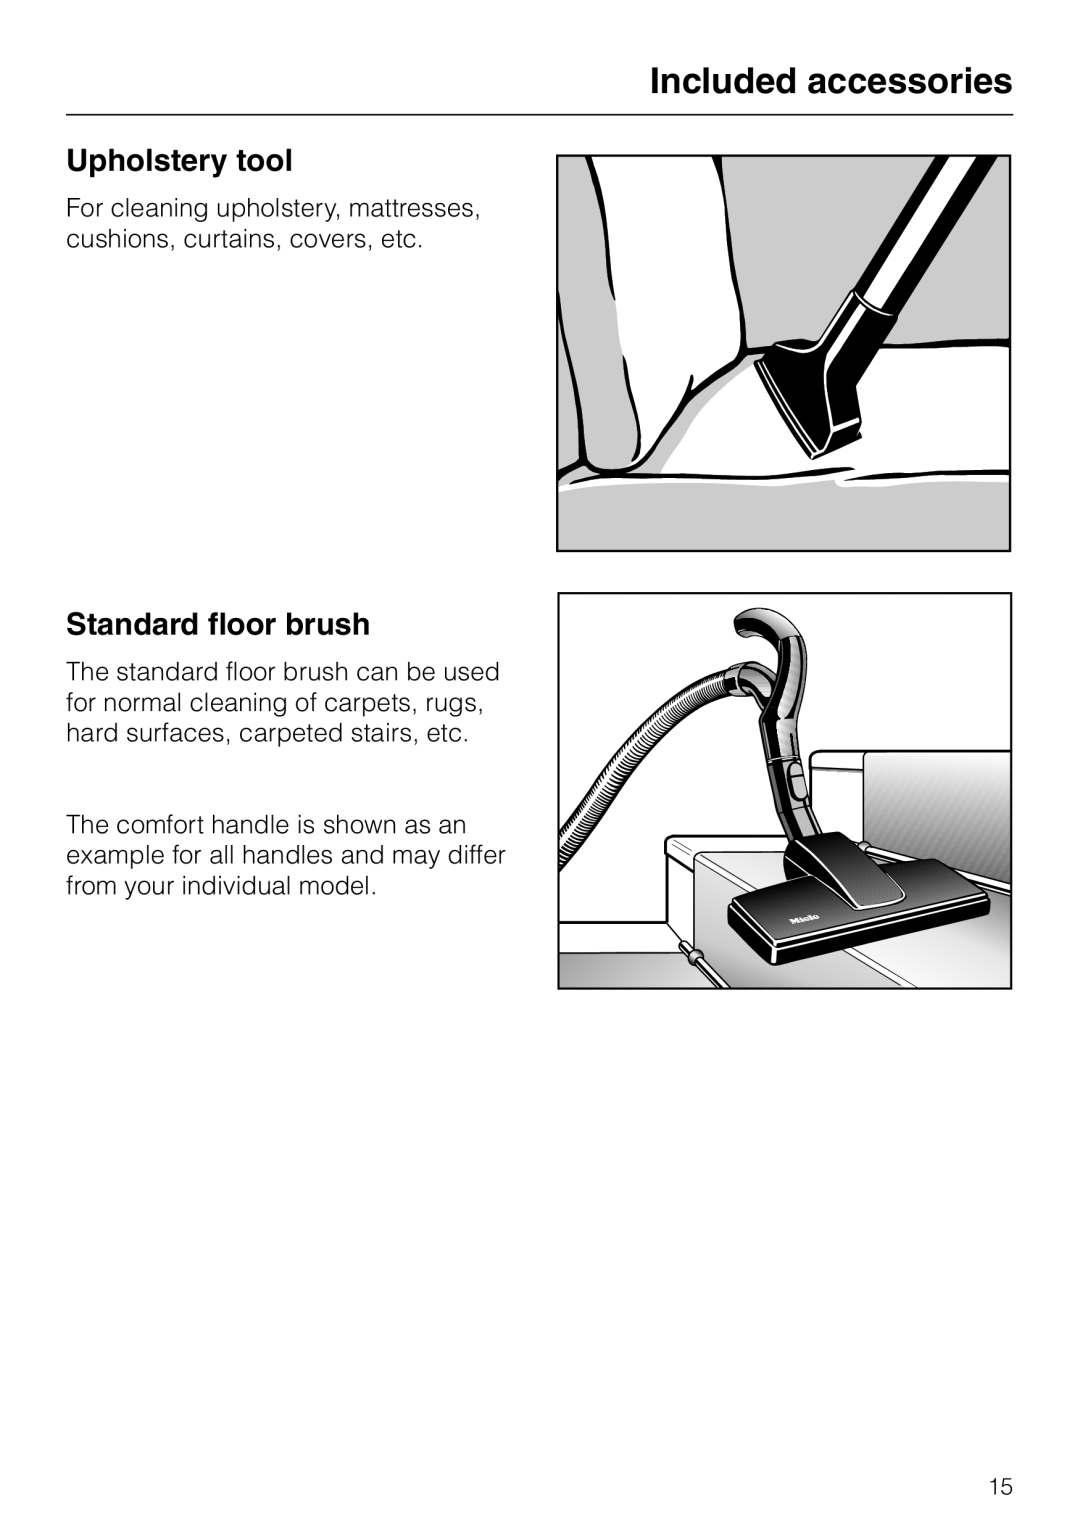 Miele S 5000 operating instructions Upholstery tool, Standard floor brush, Included accessories 